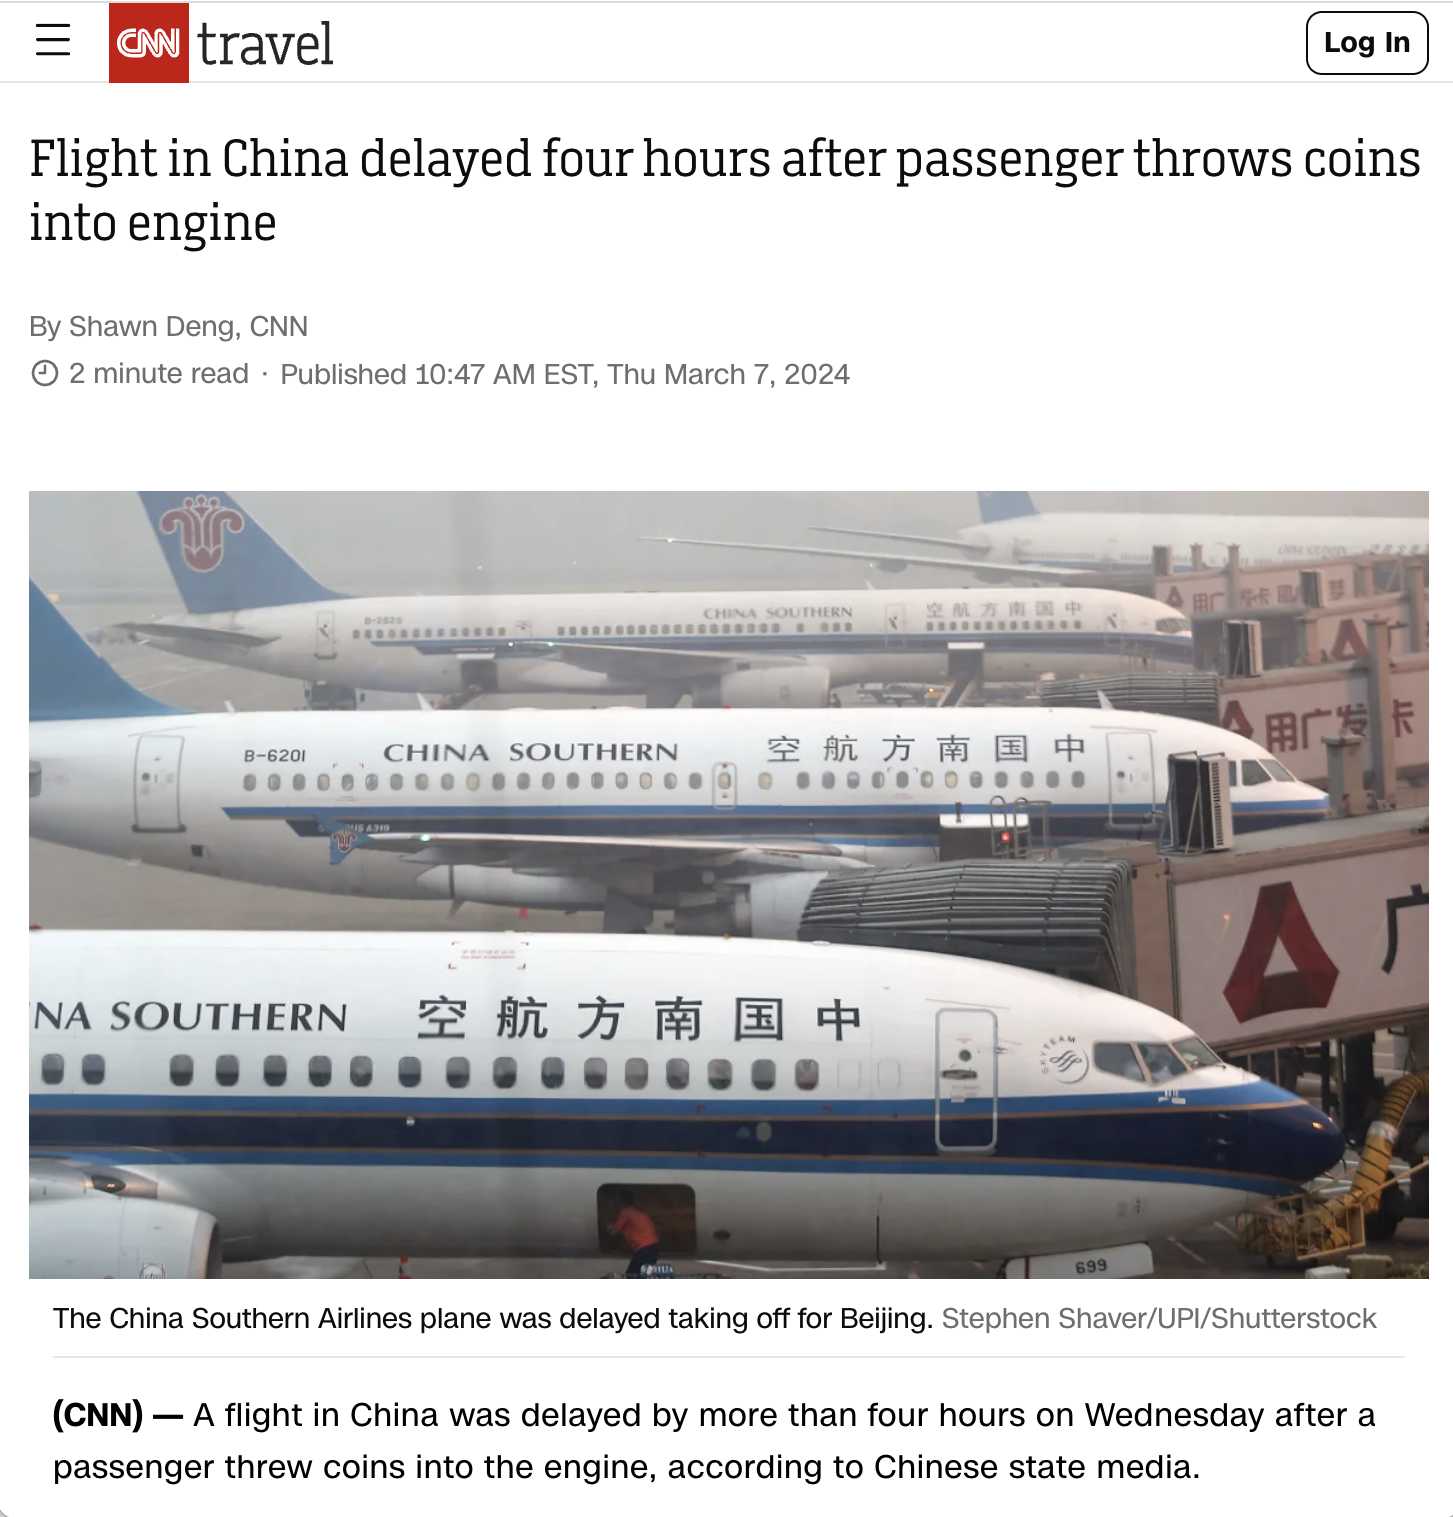 boeing 737 next generation - Cnn travel Log In Flight in China delayed four hours after passenger throws coins into engine By Shawn Deng, Cnn 2 minute read Published Est, Thu China Southern 08000000 Na Southern The China Southern Airlines plane was delaye